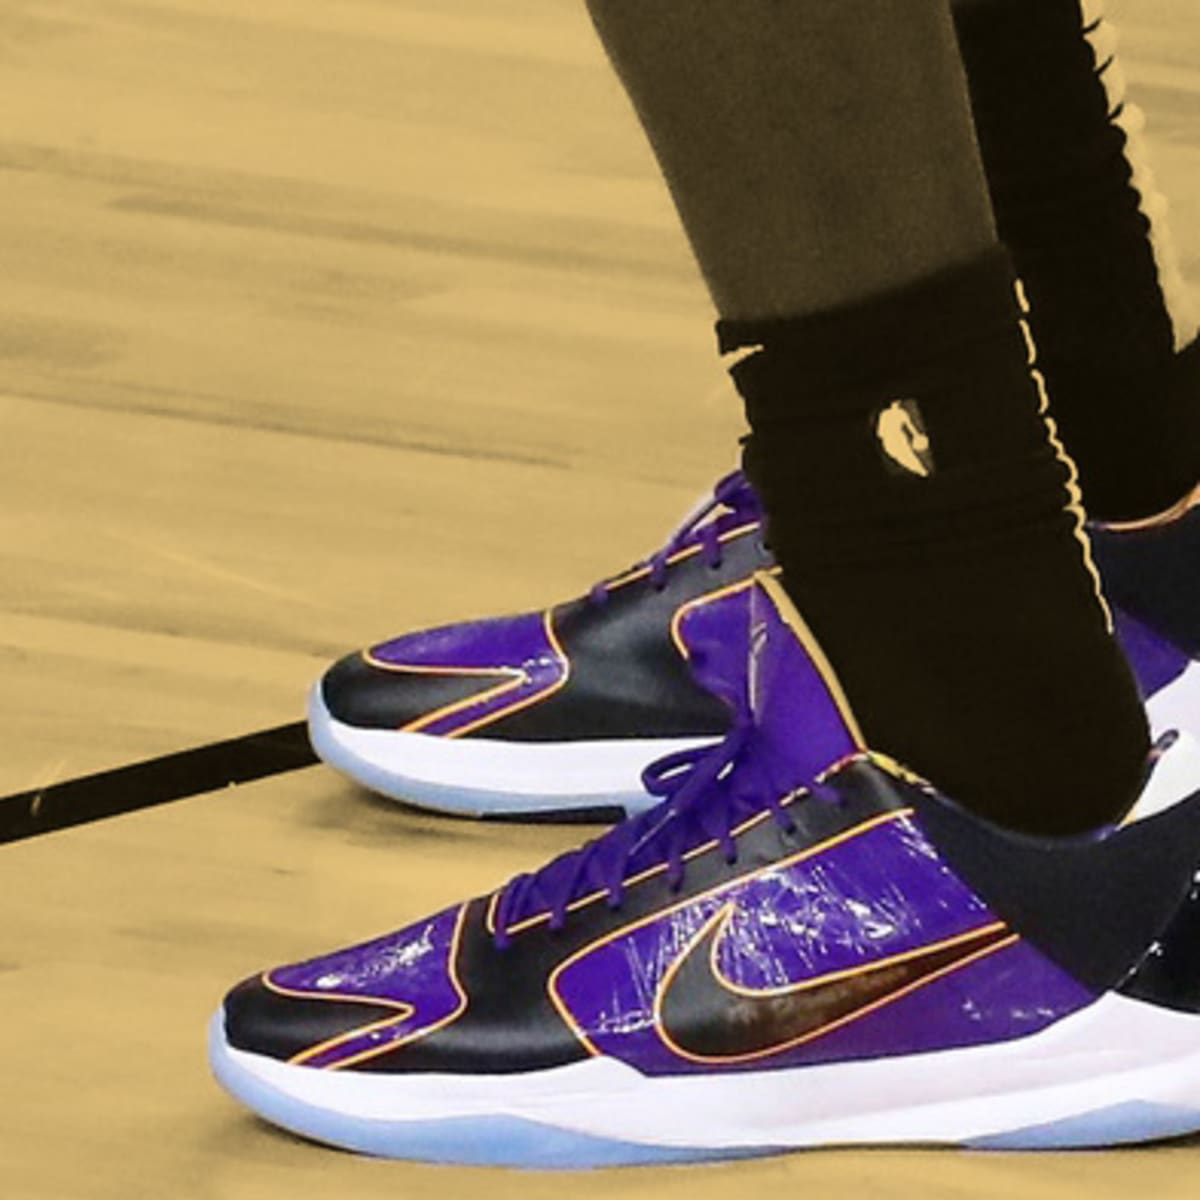 NBA's MOST WORN Basketball Shoes of 2022 So Far! 